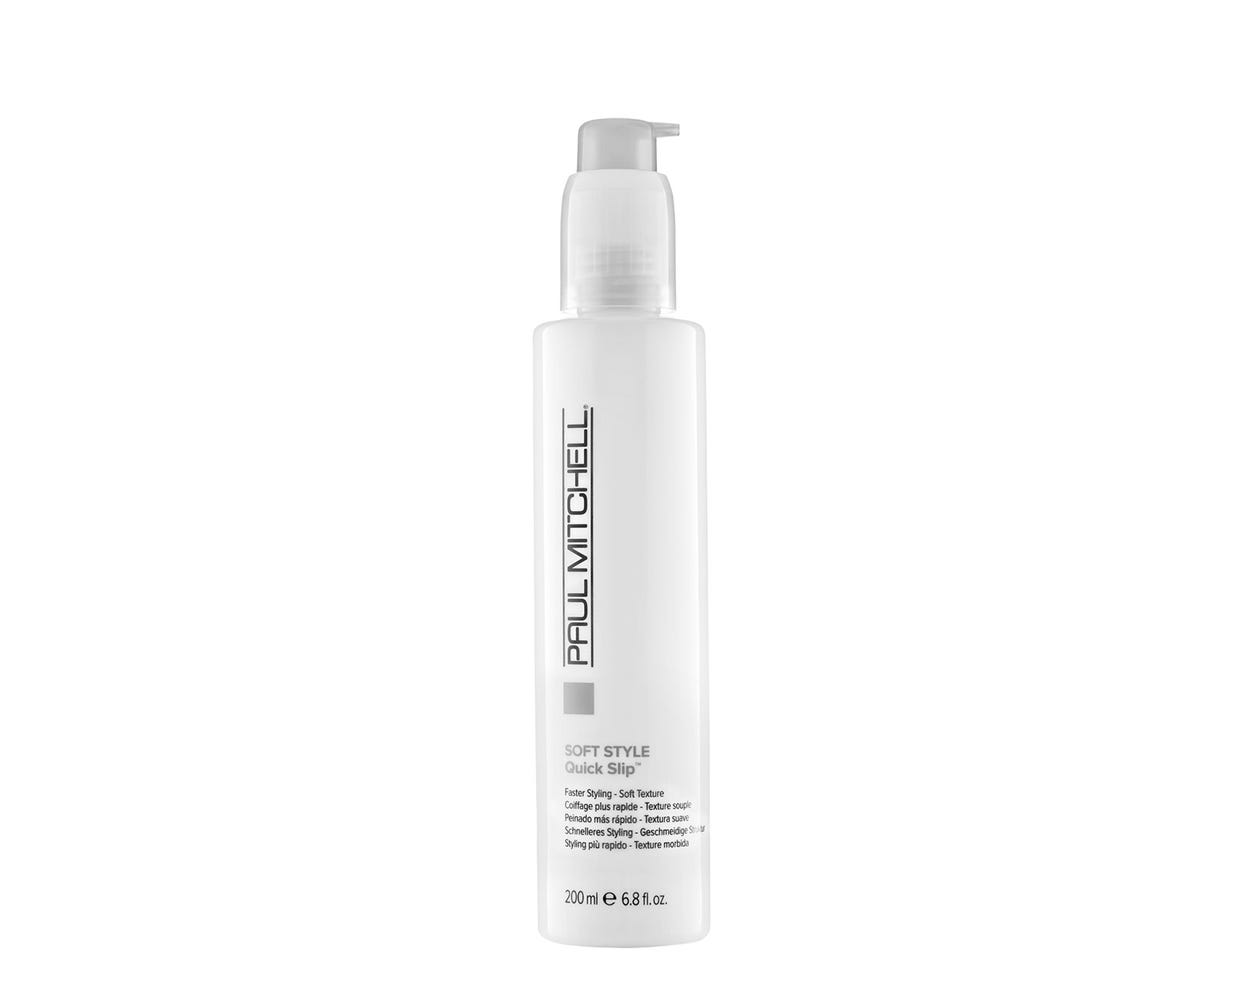 Paul Mitchell Quick Slip Styling Cream, Reduces Drying Time For Faster Styling, Soft, Flexible Hold, For All Hair Types, 6.8 fl. oz.